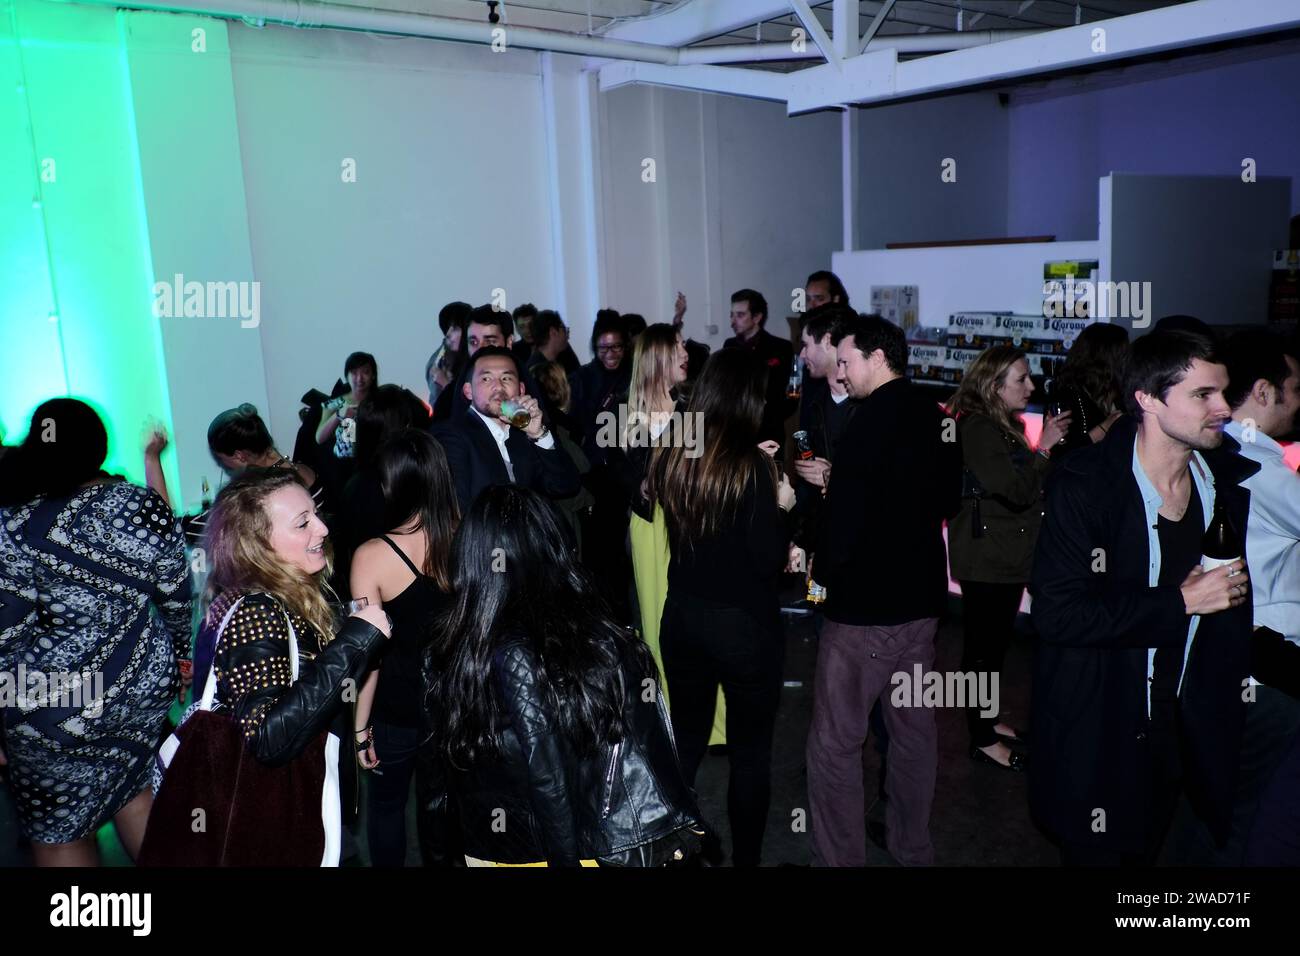 Dancing at a Sydney warehouse art opening event, pastel colours, green on white walls, pop up bar and nightlife photographed by Street Fashion Sydney Stock Photo